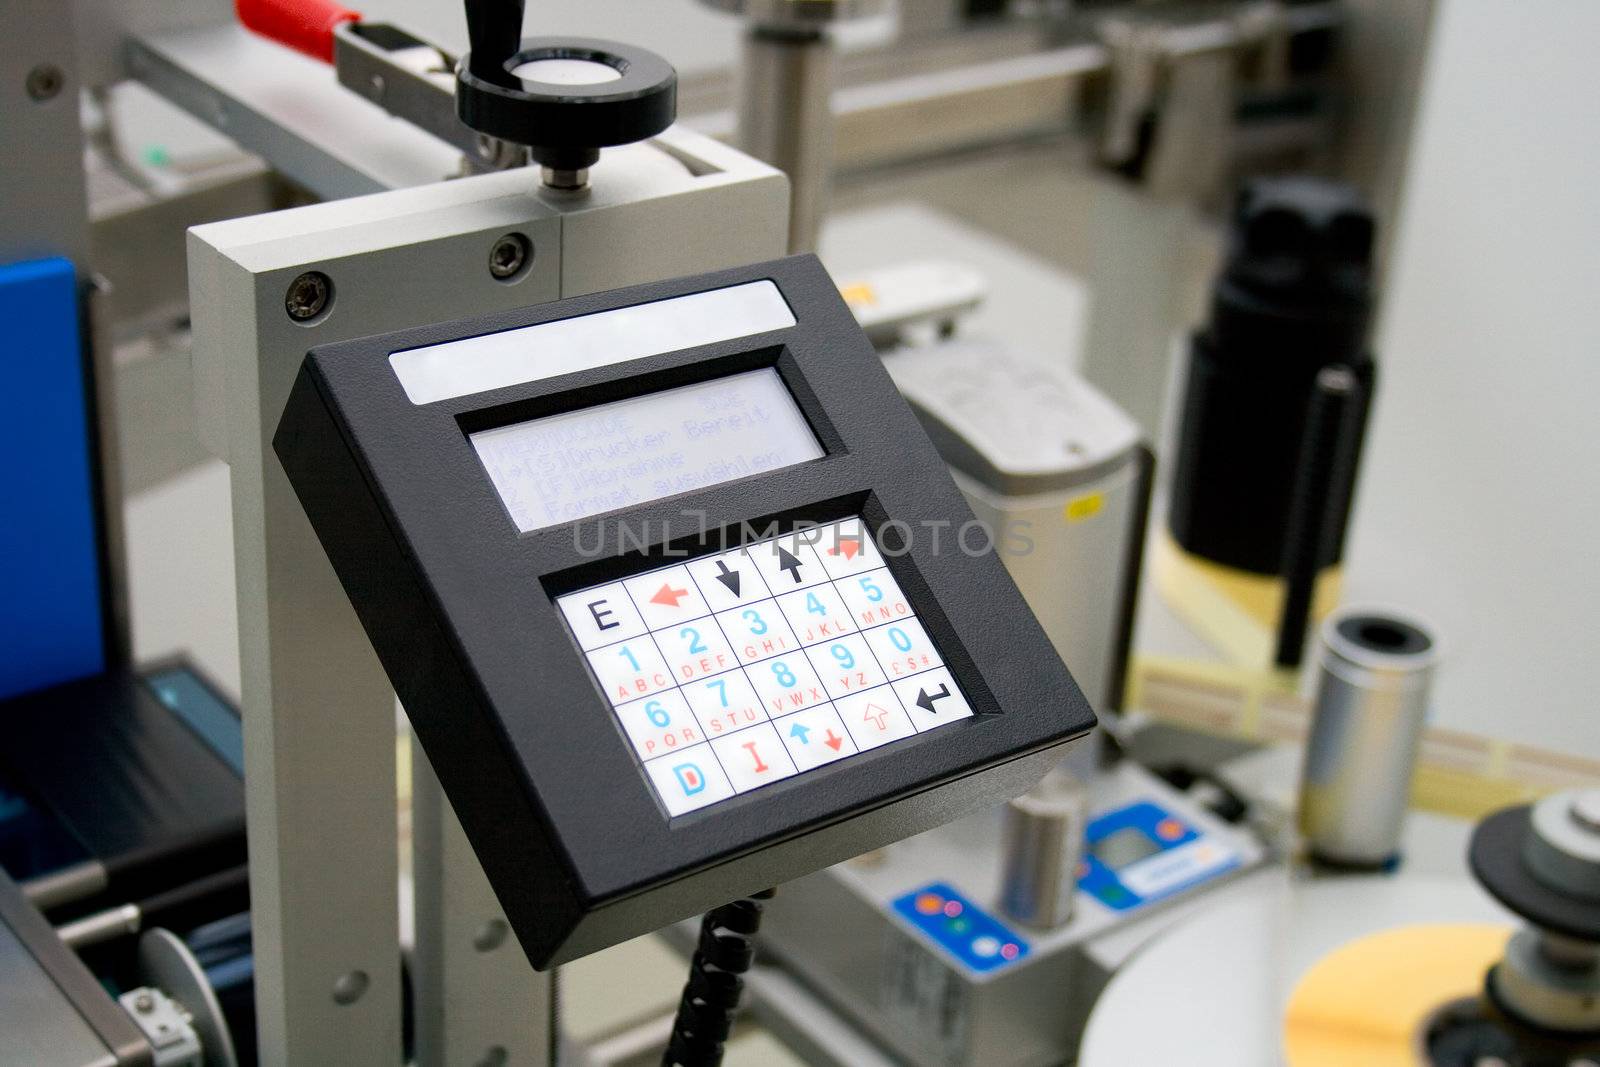 Medicine production in a pharmaceutical industry. Control panel labeling machine.